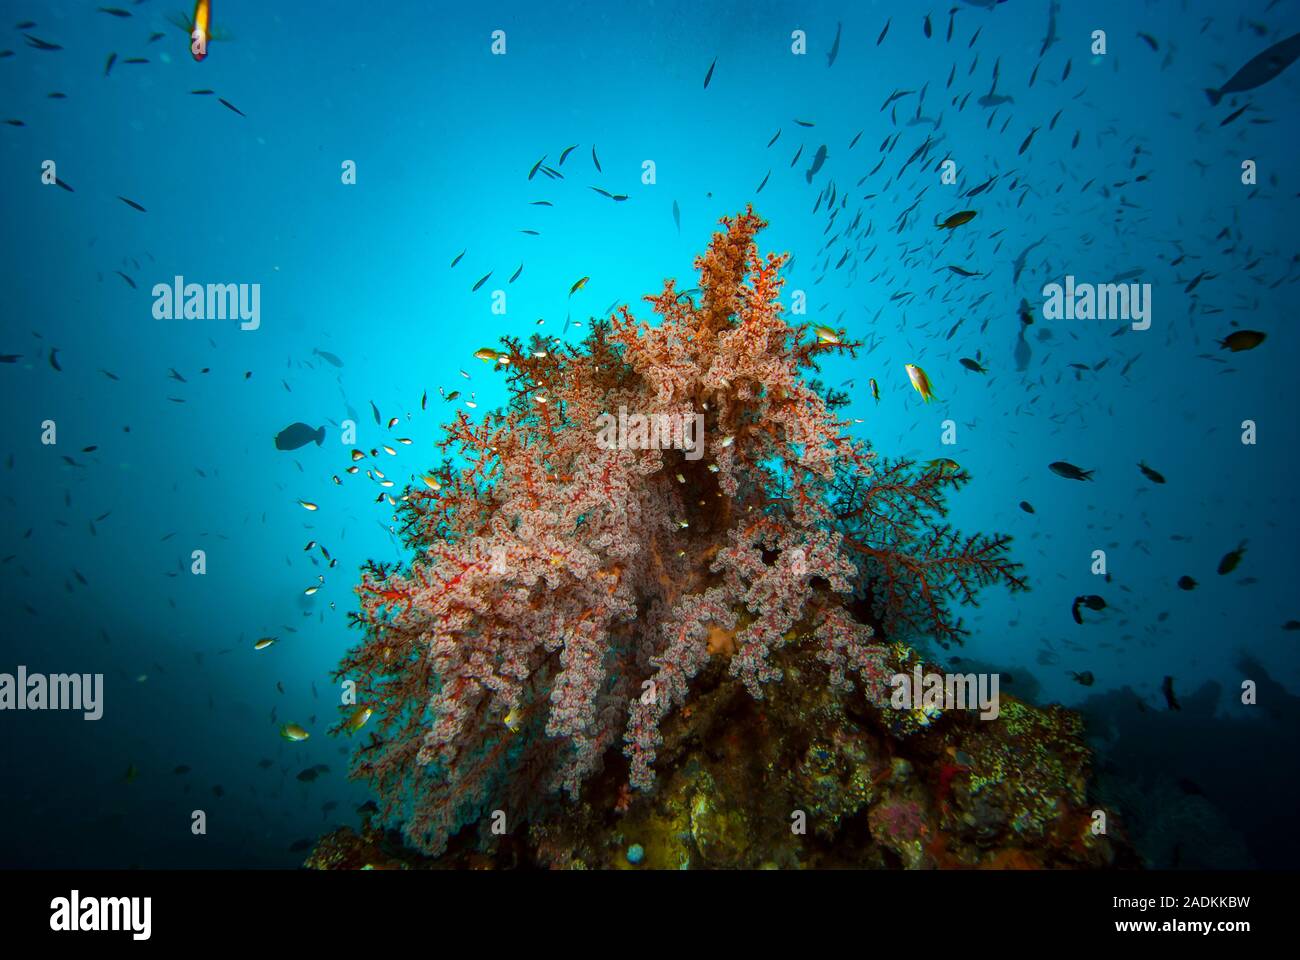 Tropical marine biodiversity in the Indonesian Coral Triangle. Coral Reef Underwater Landscape Stock Photo